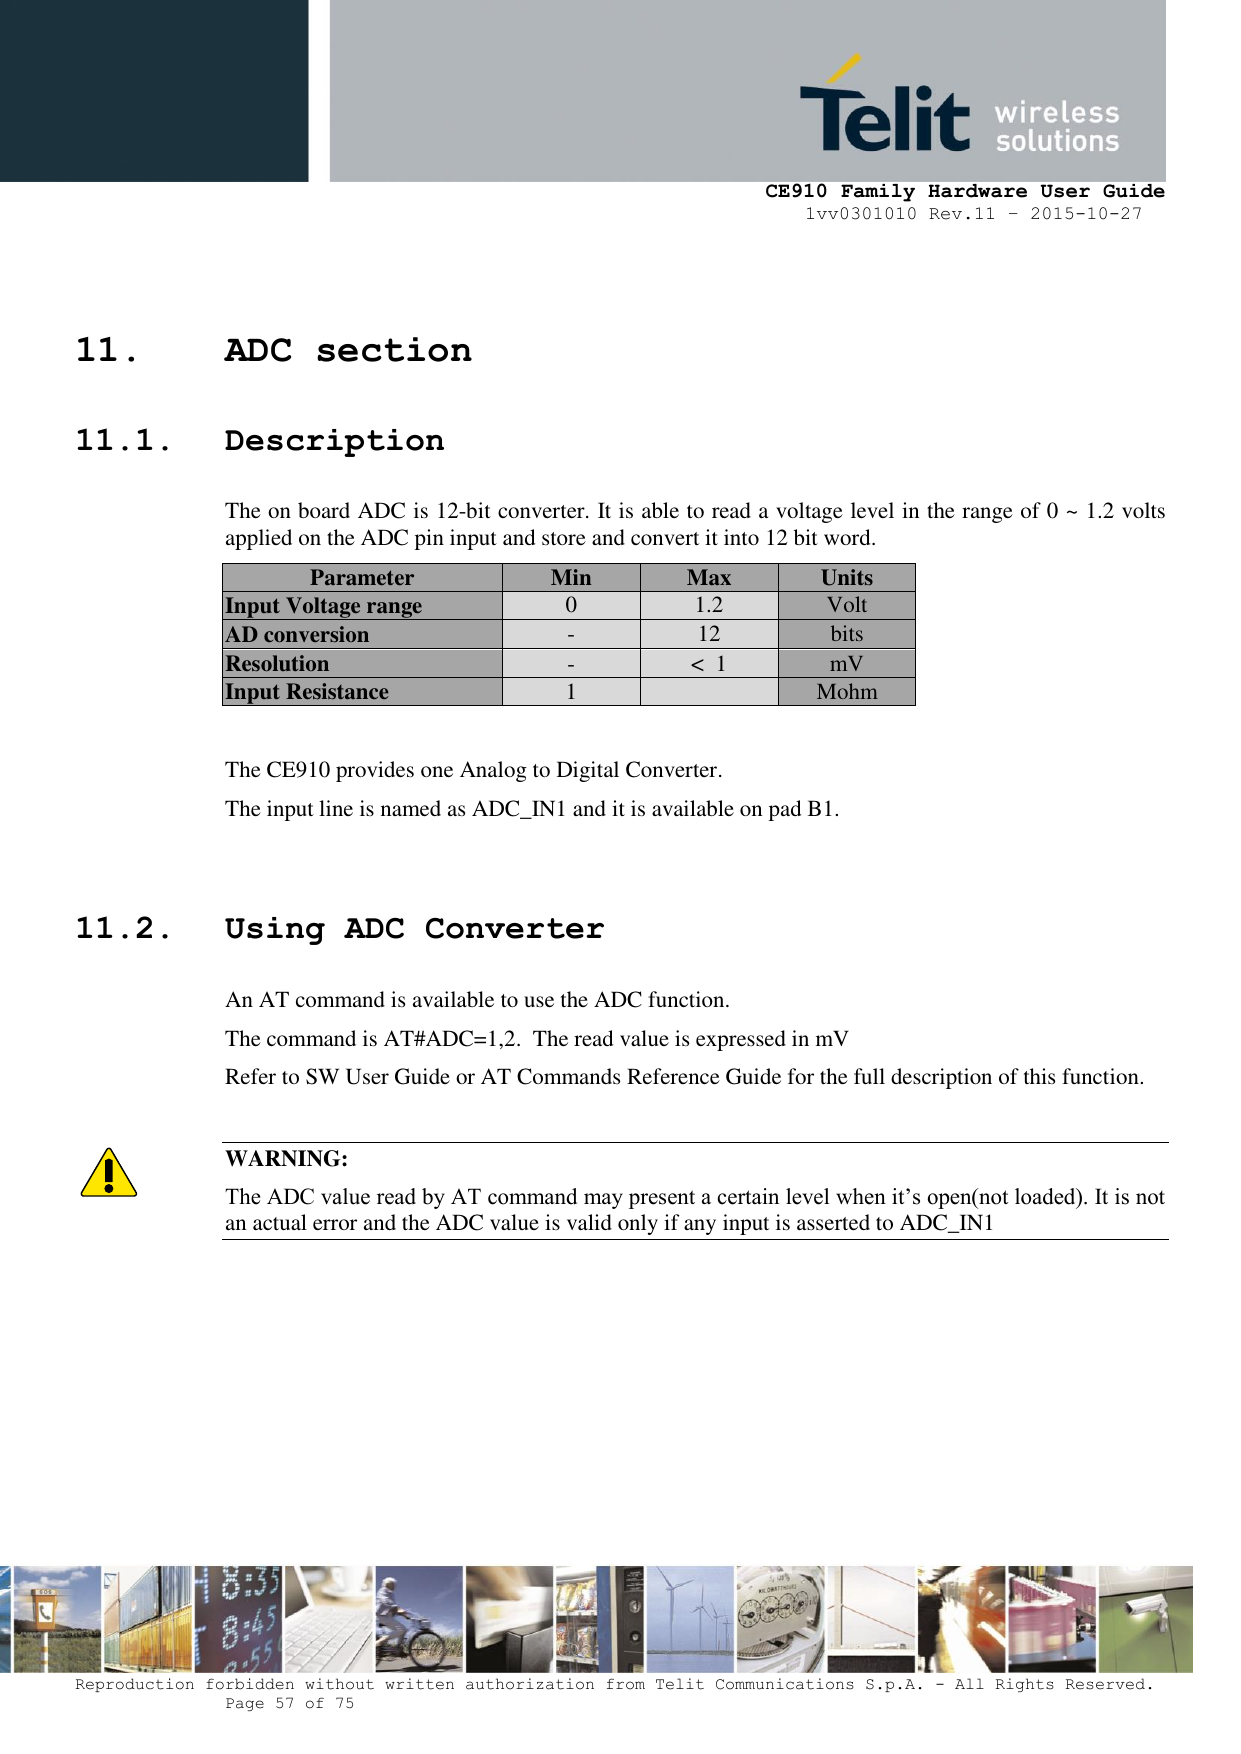     CE910 Family Hardware User Guide 1vv0301010 Rev.11 – 2015-10-27 Reproduction forbidden without written authorization from Telit Communications S.p.A. - All Rights Reserved.    Page 57 of 75                                                     11. ADC section 11.1. Description The on board ADC is 12-bit converter. It is able to read a voltage level in the range of 0 ~ 1.2 volts applied on the ADC pin input and store and convert it into 12 bit word. Parameter Min Max Units Input Voltage range 0 1.2 Volt AD conversion - 12 bits Resolution - &lt;  1 mV Input Resistance 1  Mohm  The CE910 provides one Analog to Digital Converter.  The input line is named as ADC_IN1 and it is available on pad B1.  11.2. Using ADC Converter An AT command is available to use the ADC function.  The command is AT#ADC=1,2.  The read value is expressed in mV Refer to SW User Guide or AT Commands Reference Guide for the full description of this function.  WARNING: The ADC value read by AT command may present a certain level when it’s open(not loaded). It is not an actual error and the ADC value is valid only if any input is asserted to ADC_IN1        